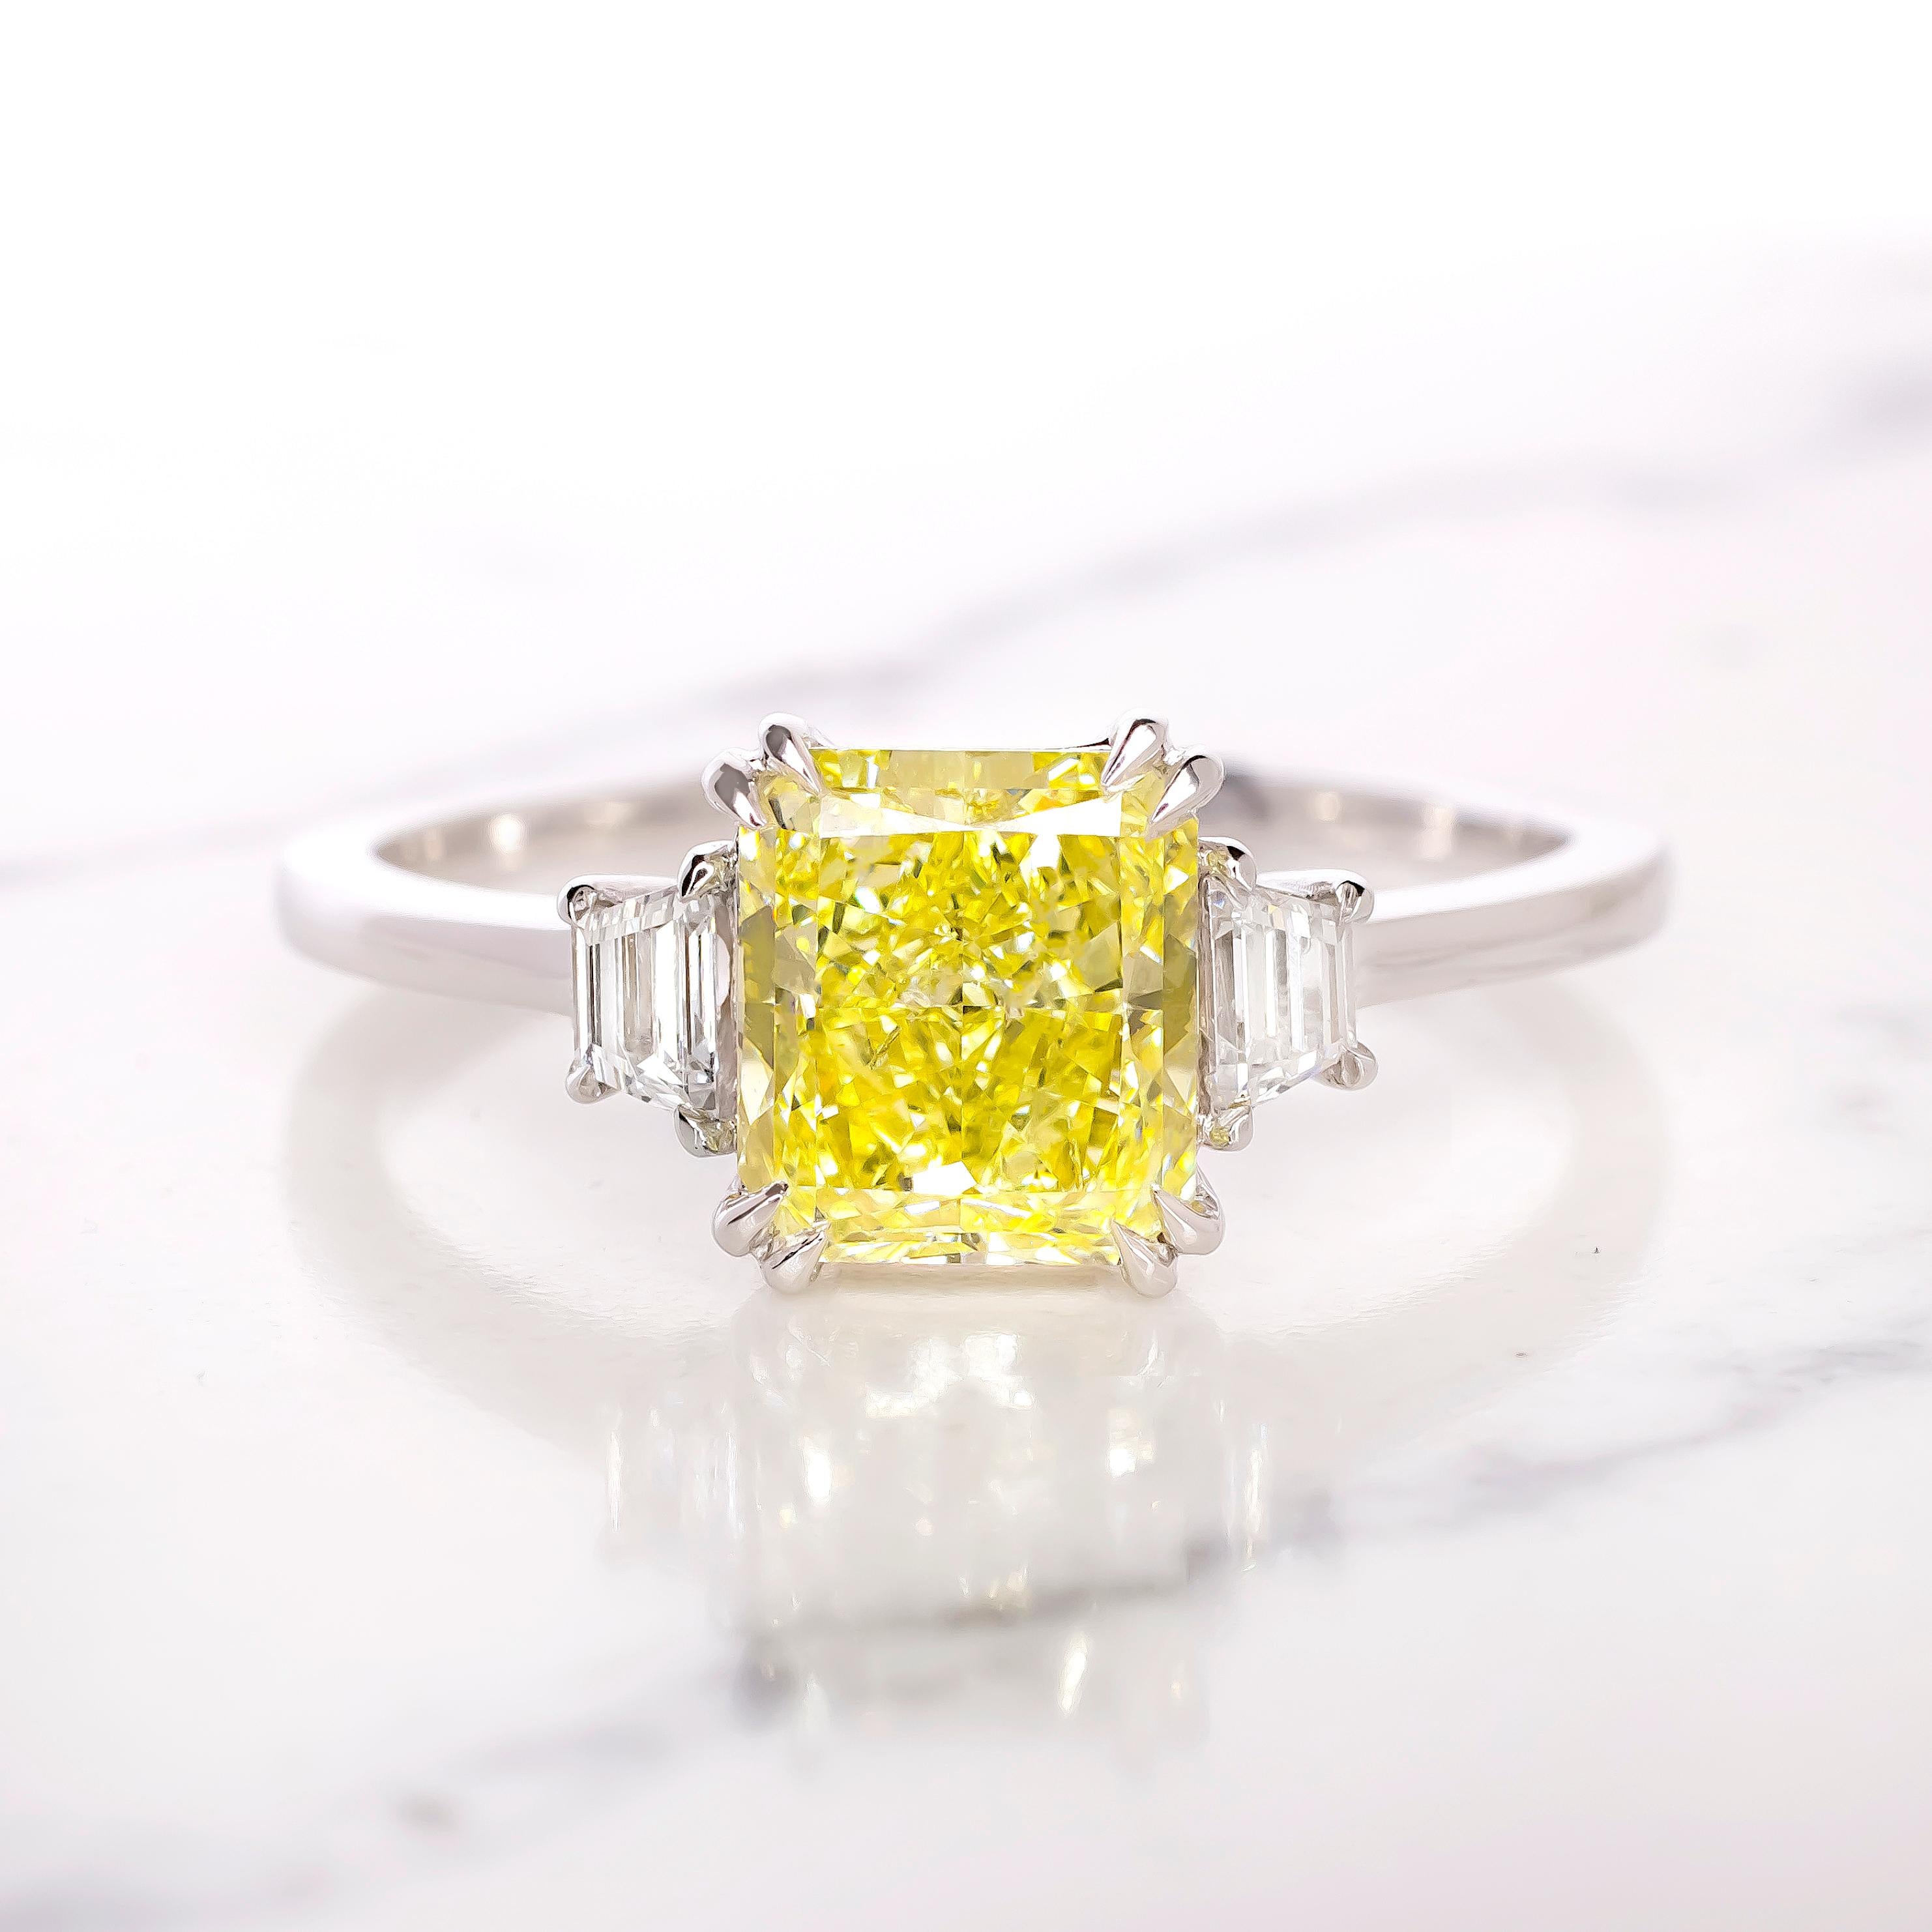 This exquisite ring from Antinori Di Sanpietro, a renowned Italian high jewelry brand, features a captivating cushion-cut colored diamond that commands attention. 

The central stone is a remarkable 1.38-carat fancy yellow diamond, its vibrant hue